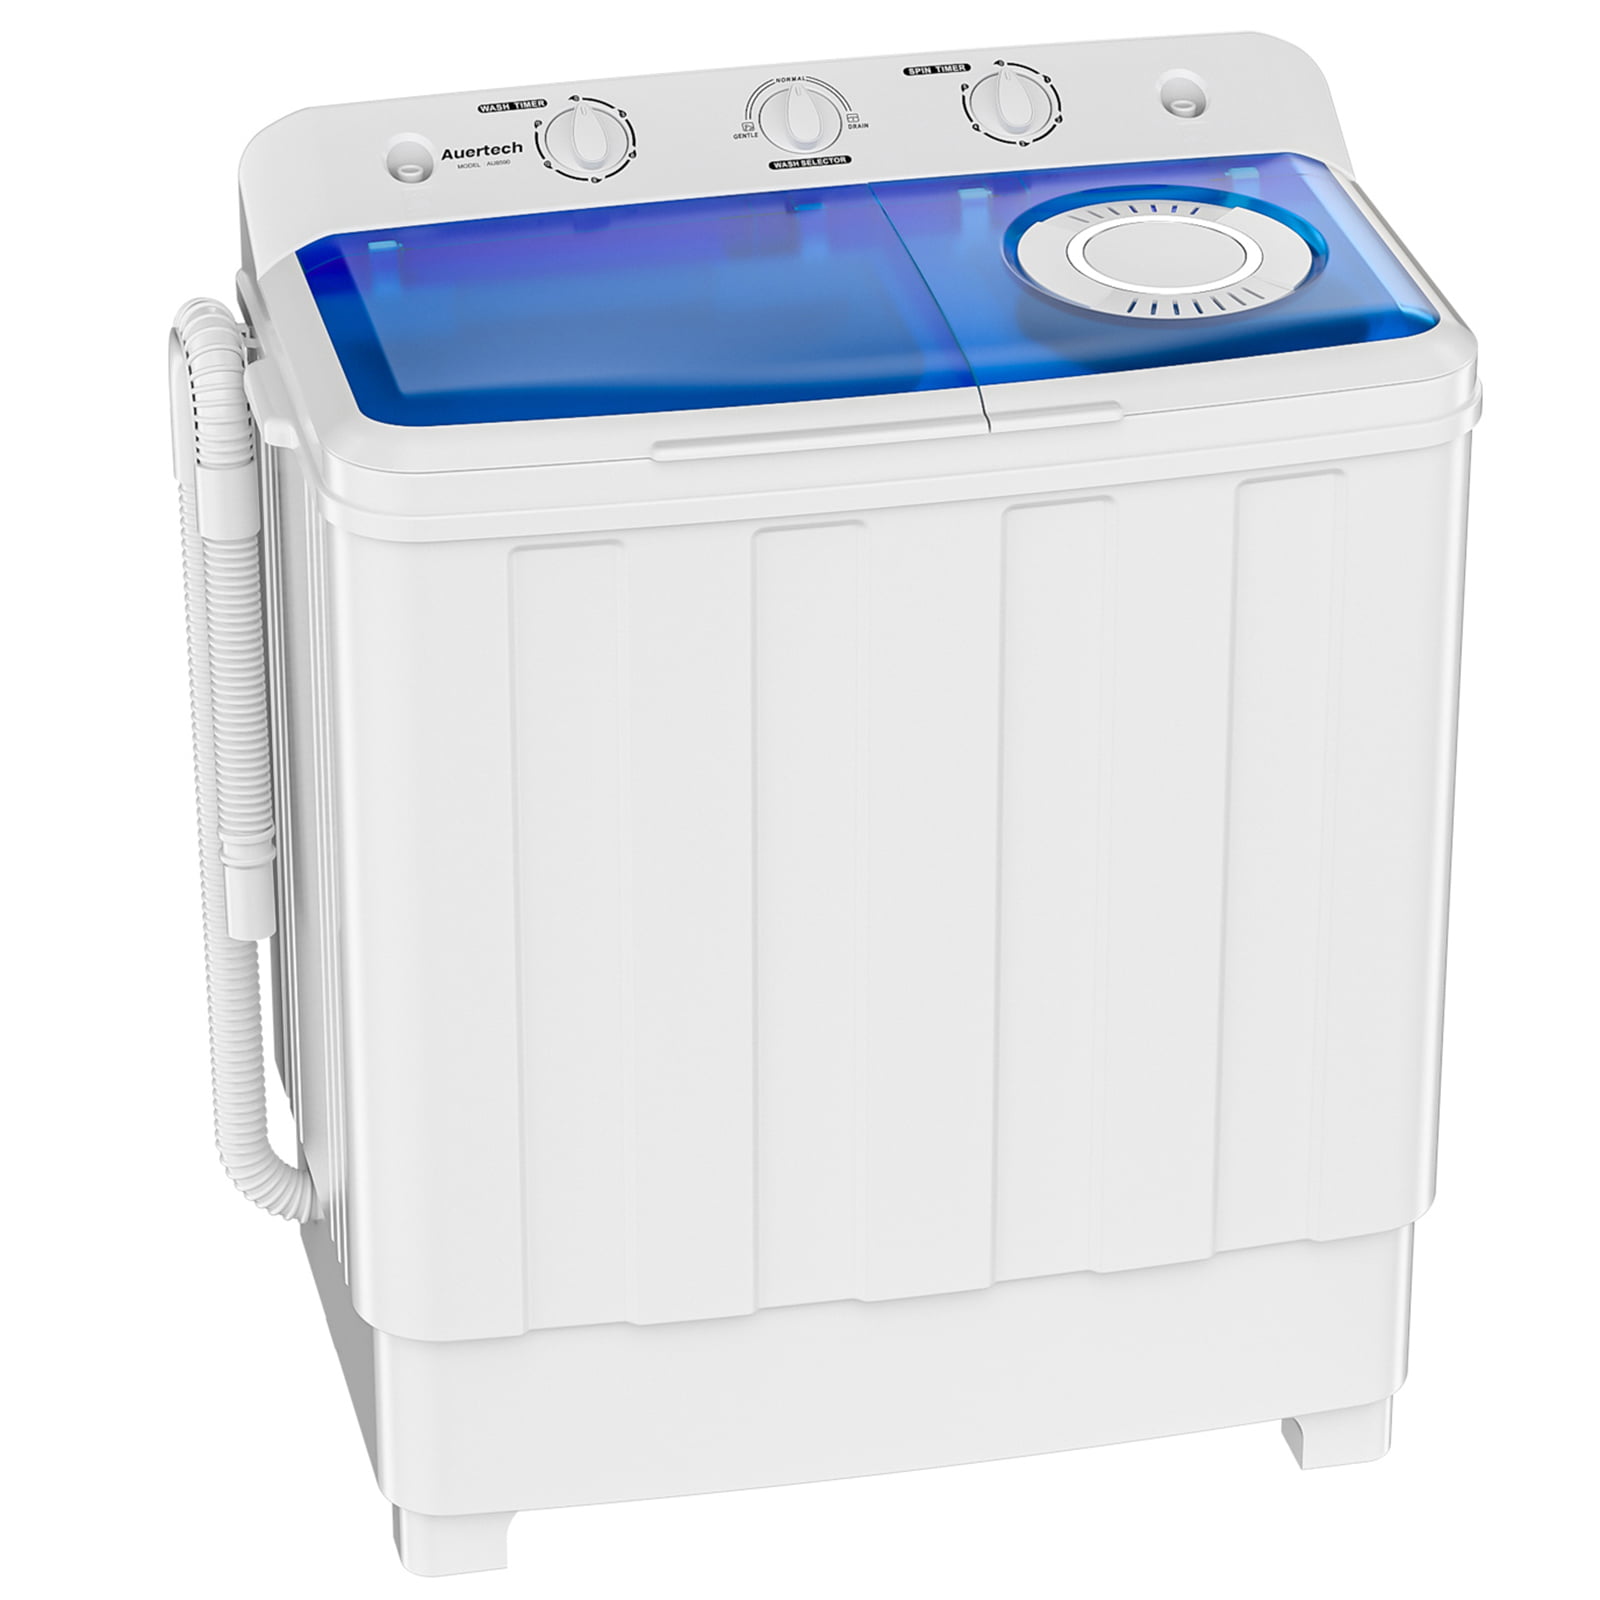 Portable Compact Mini Laundry Clothes Washing Machine Spin Washer Dryer Twin Tub 